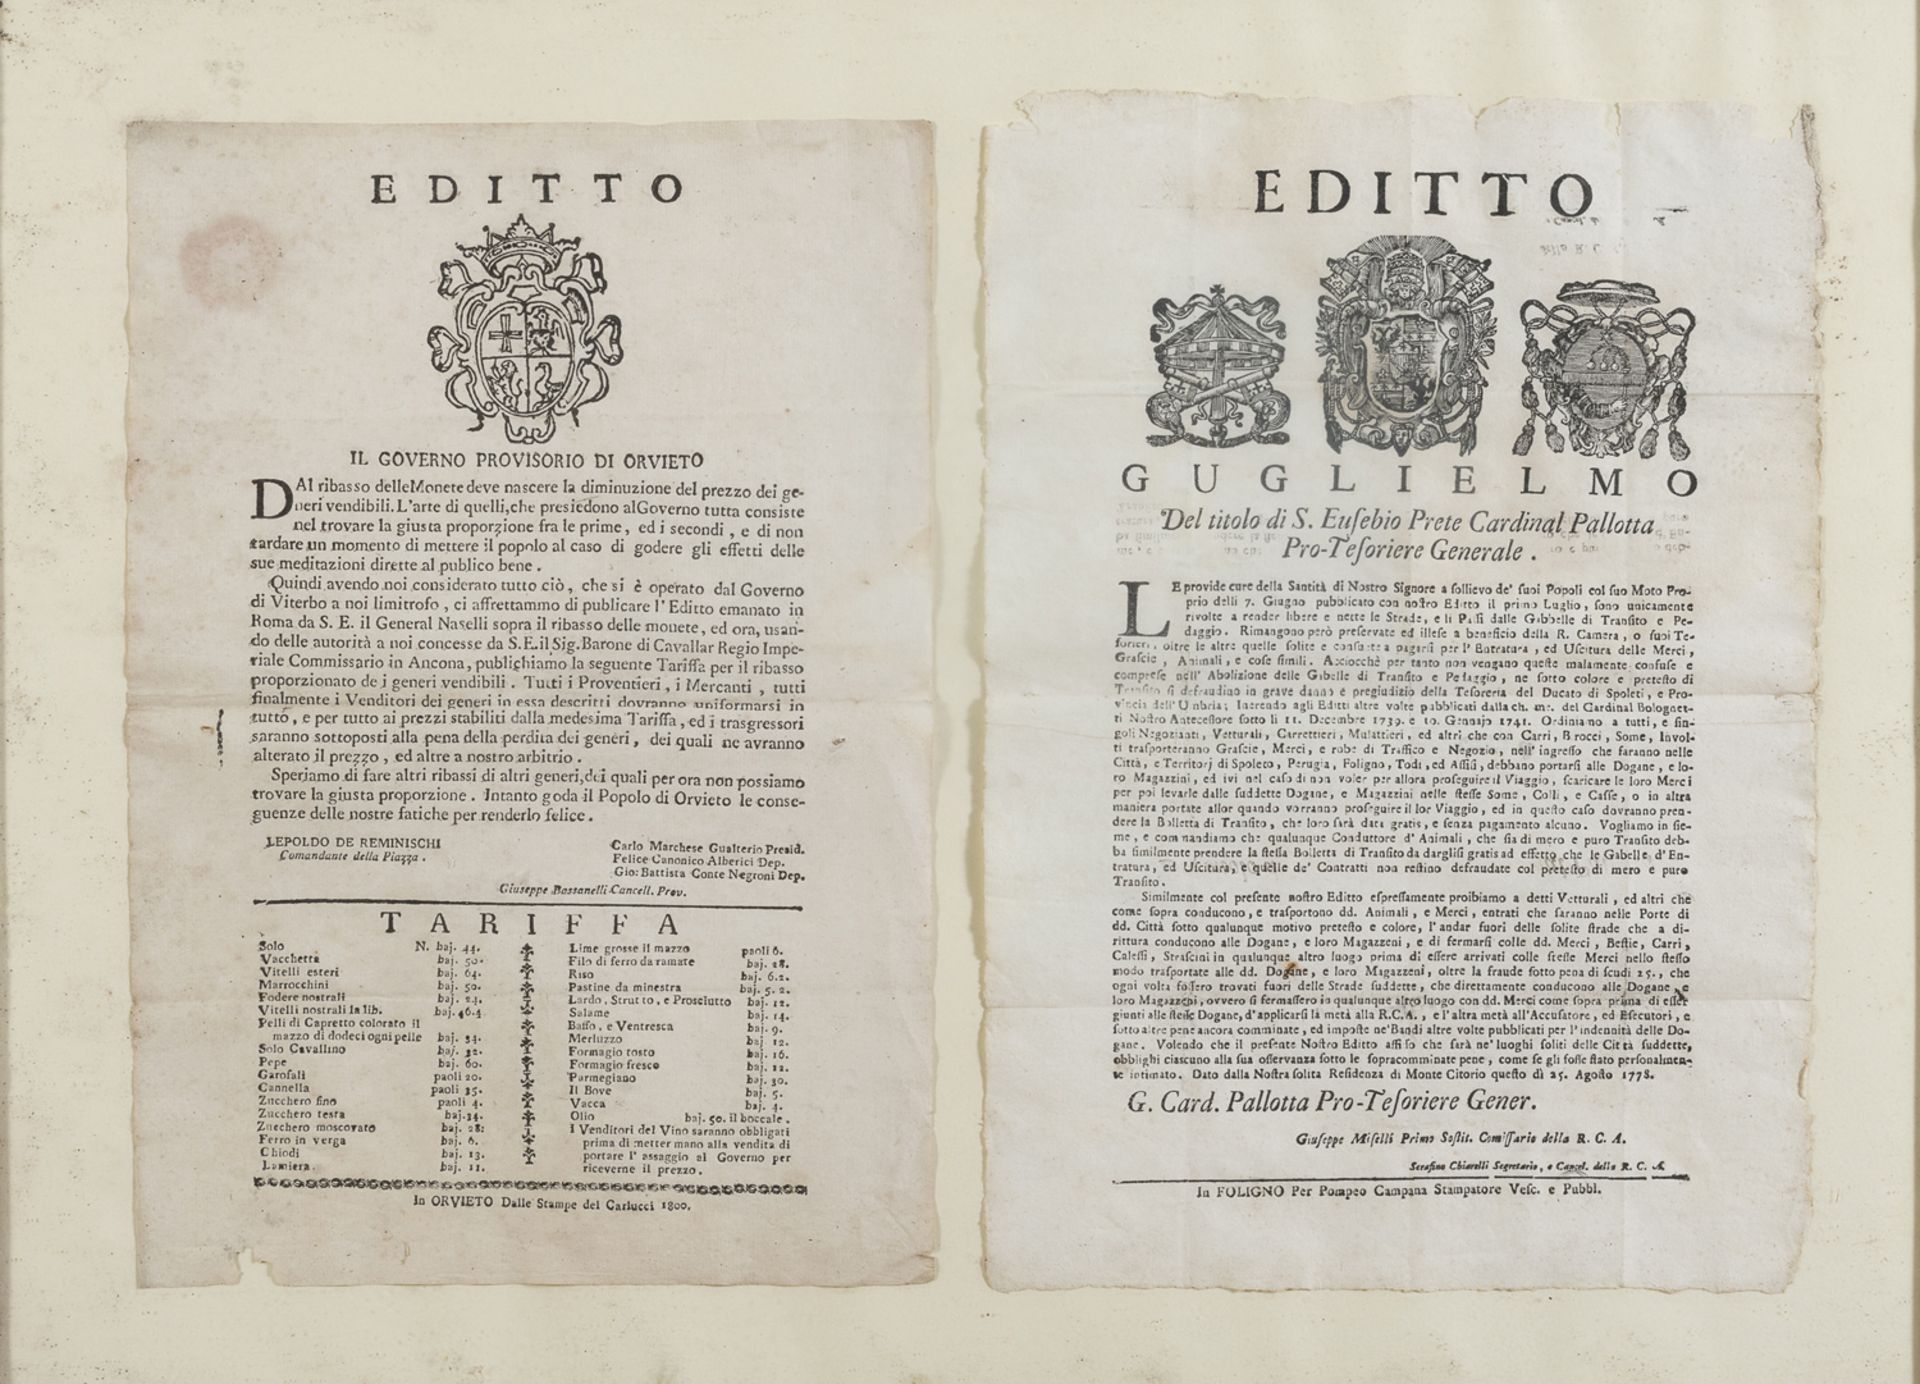 TWO EDITTS 18TH CENTURY